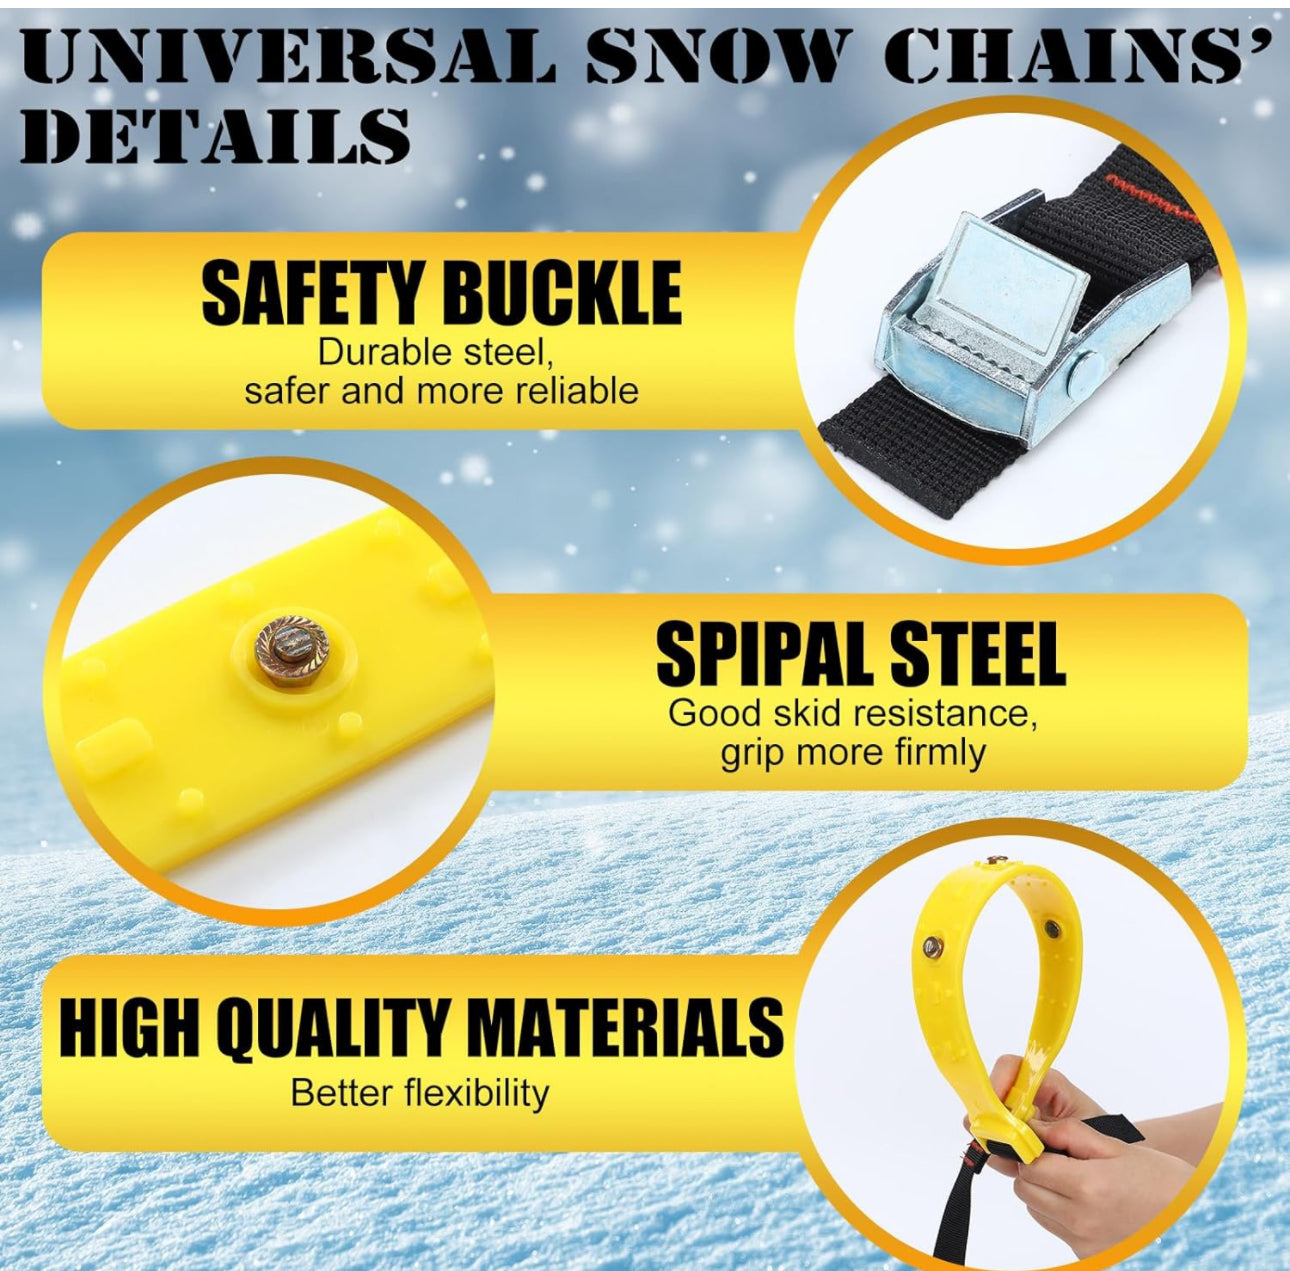 Datanly 20 Pcs Anti Slip Snow Chains for Tire Emergency Universal Adjustable Mud Ice Sand Tire Chains for Car SUV Truck Lawn Winter Security,